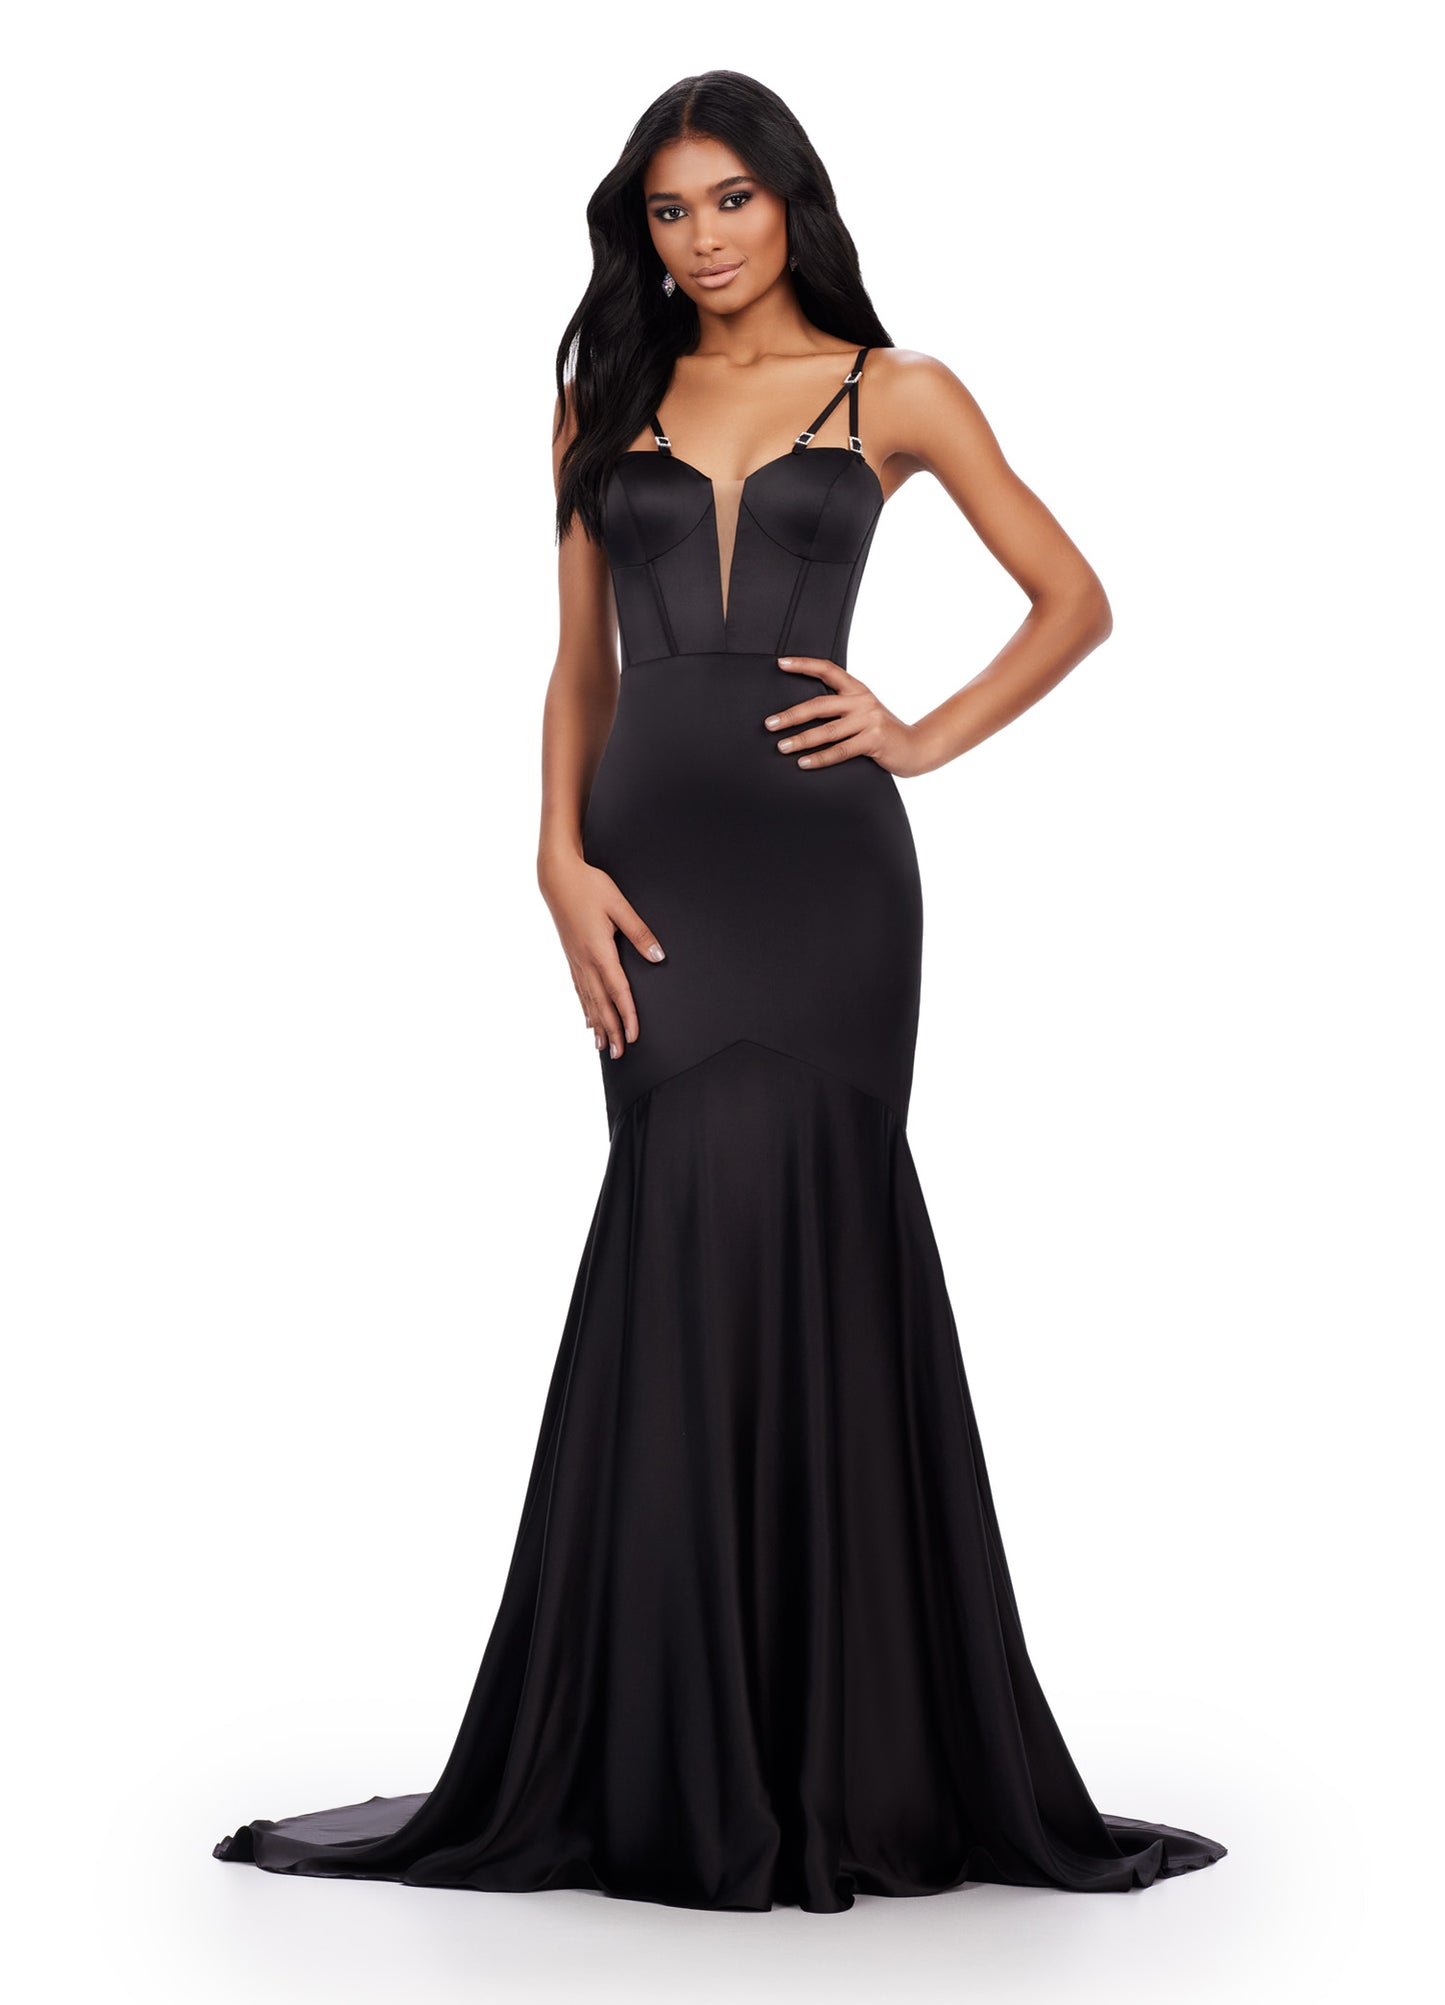 Achieve a stunning look in the Ashley Lauren 11644 Long Prom Dress. With a mermaid silhouette, corset bodice, and spaghetti straps, this formal gown is both flattering and elegant. Adorned with intricate beaded details, it's the perfect choice for prom or pageants. Make a statement and turn heads with this exquisite dress. Classy and timeless! This satin spaghetti strap gown features a corset bustier and beaded details on the straps.